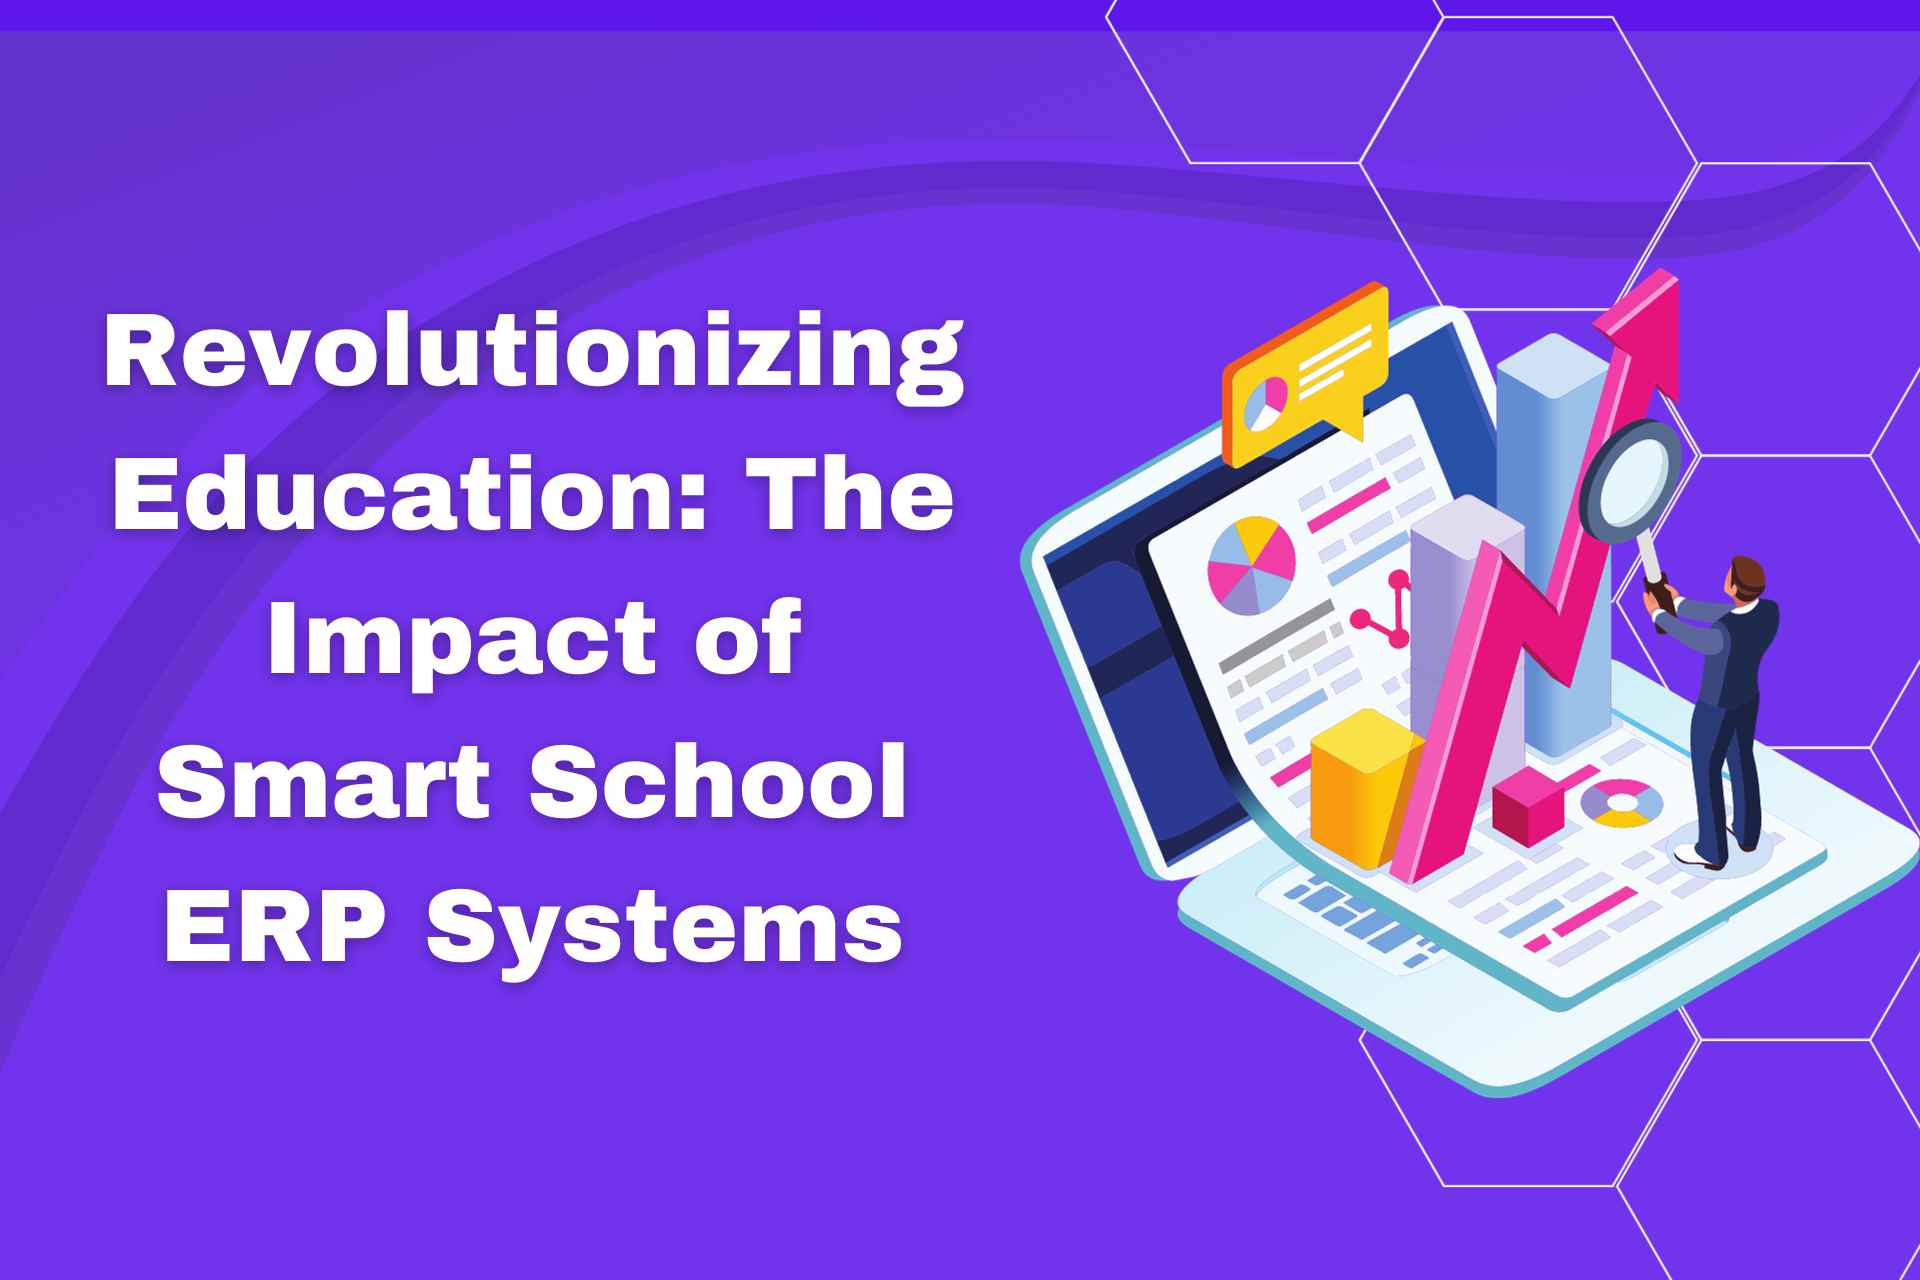 Revolutionizing Education: The Impact of Smart School ERP Systems